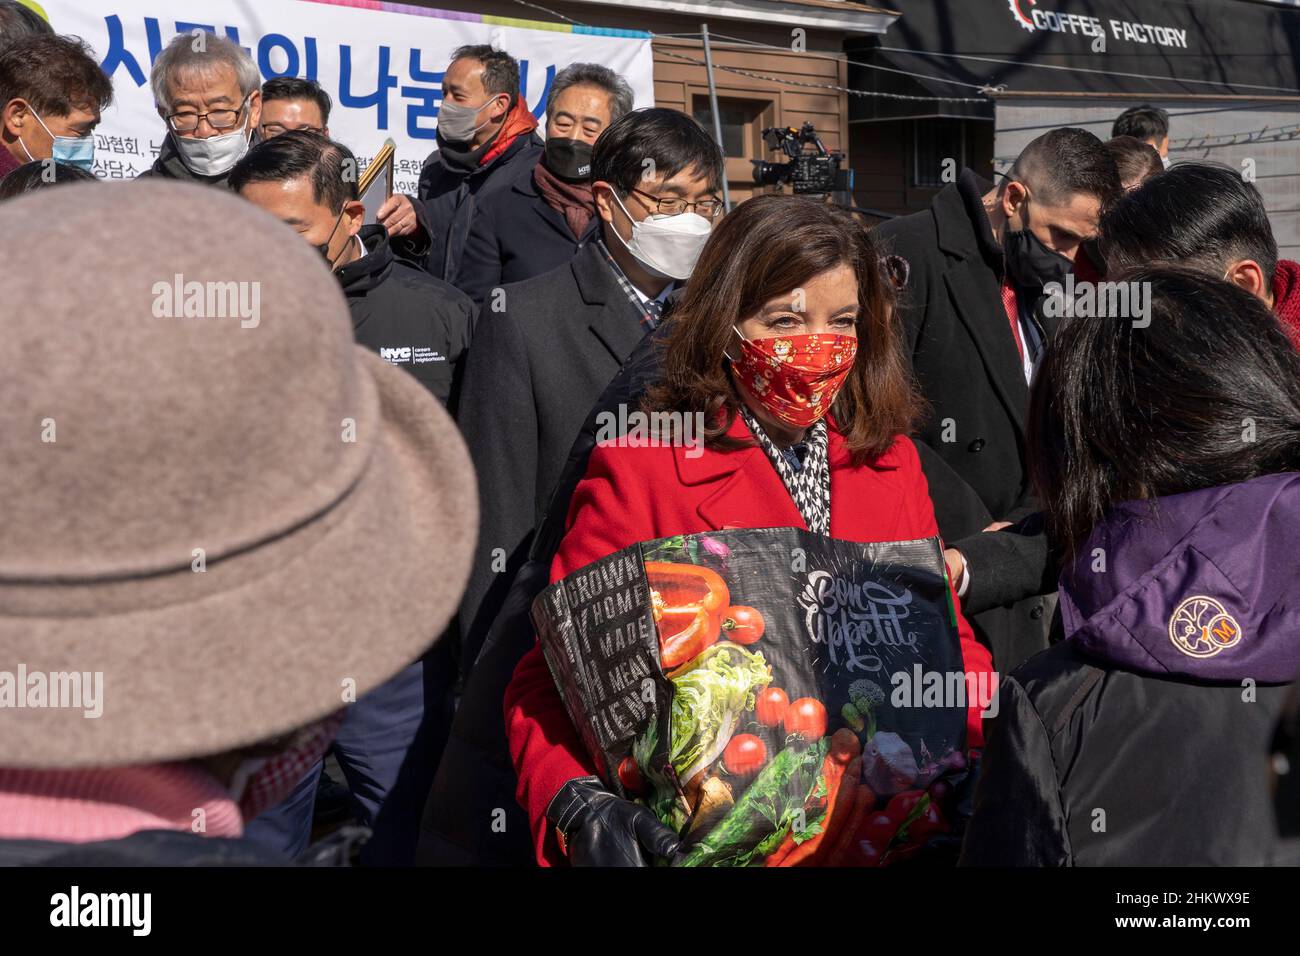 NEW YORK, NEW YORK - FEBRUARY 05:  New York Governor Kathy Hochul participates in the Korean American Association of Greater New York food giveaway on February 5, 2022 in Queens Borough of New York City.  The Korean American Association of Greater New York celebrates the Lunar New Year by donating food and PPE to 1,000 families in need. Stock Photo